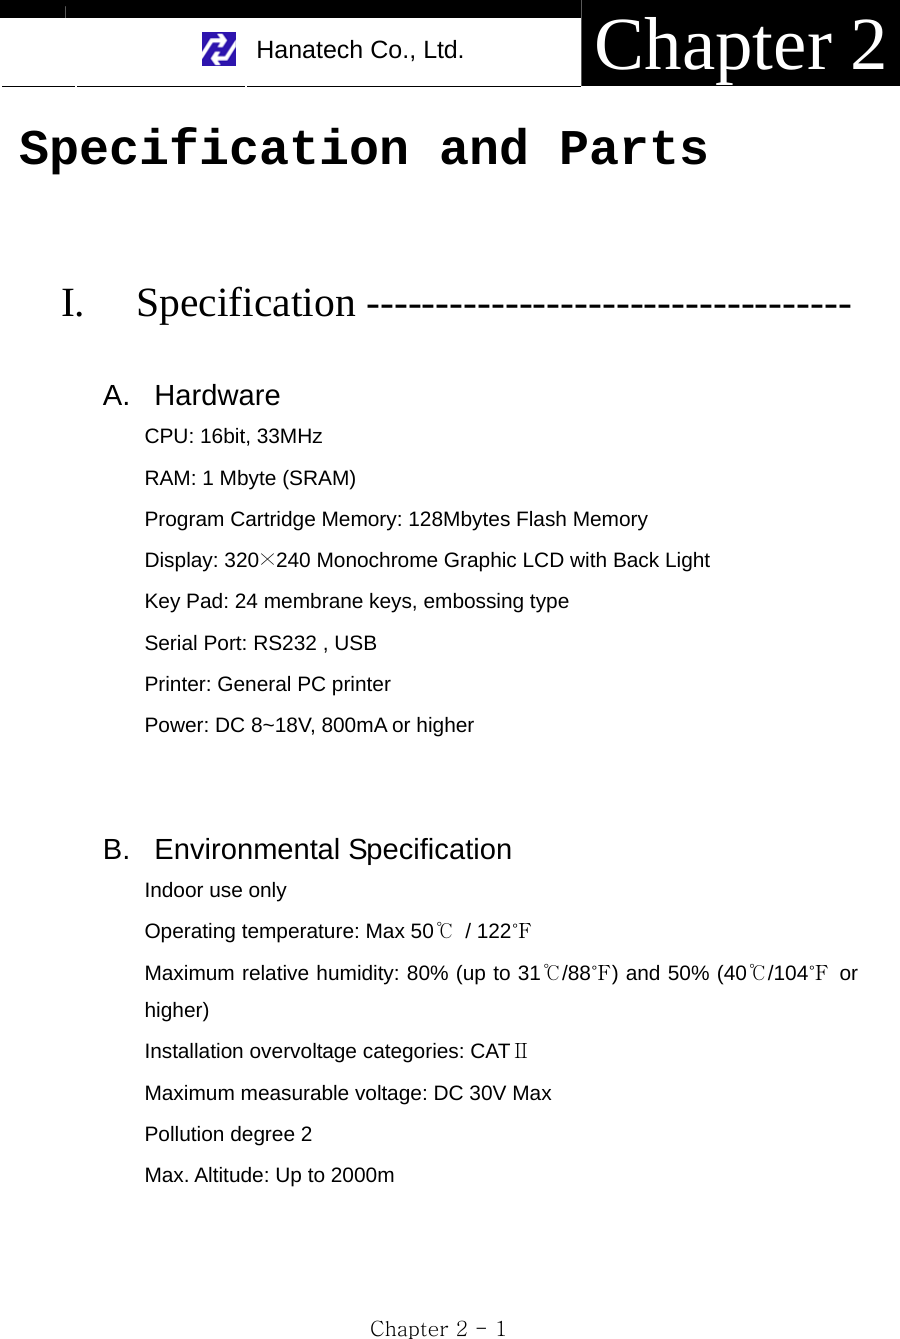     Hanatech Co., Ltd.  Chapter 2 Chapter 2 - 1 Specification and Parts   I. Specification -----------------------------------  A. Hardware CPU: 16bit, 33MHz RAM: 1 Mbyte (SRAM) Program Cartridge Memory: 128Mbytes Flash Memory Display: 320×240 Monochrome Graphic LCD with Back Light Key Pad: 24 membrane keys, embossing type Serial Port: RS232 , USB Printer: General PC printer Power: DC 8~18V, 800mA or higher   B. Environmental Specification Indoor use only Operating temperature: Max 50℃ / 122℉ Maximum relative humidity: 80% (up to 31℃/88℉) and 50% (40℃/104℉ or higher) Installation overvoltage categories: CATⅡ Maximum measurable voltage: DC 30V Max Pollution degree 2 Max. Altitude: Up to 2000m 